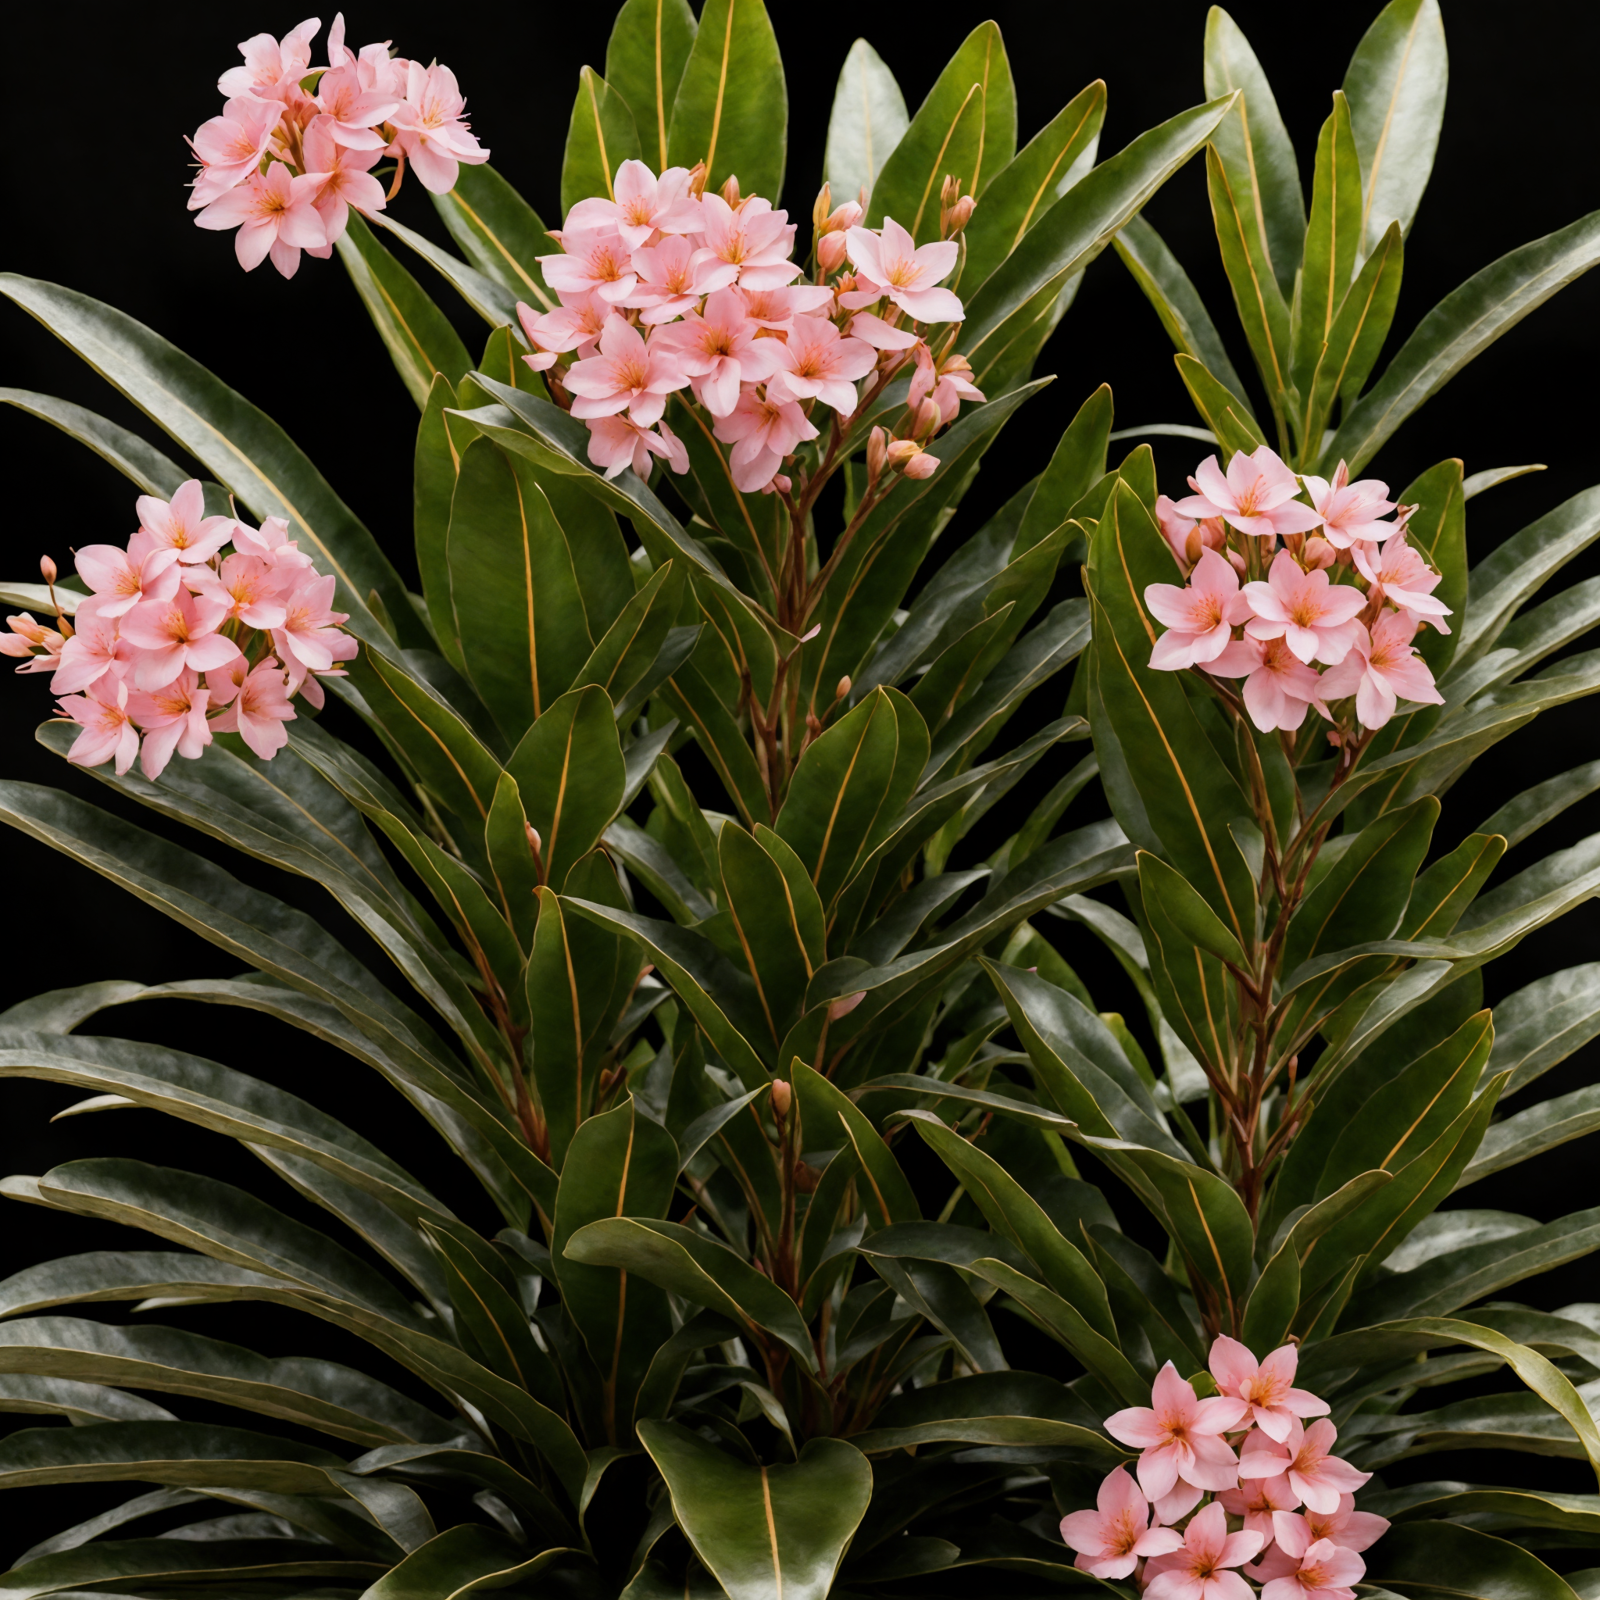 Nerium oleander with pink blossoms in a planter, clear lighting, against a dark background.